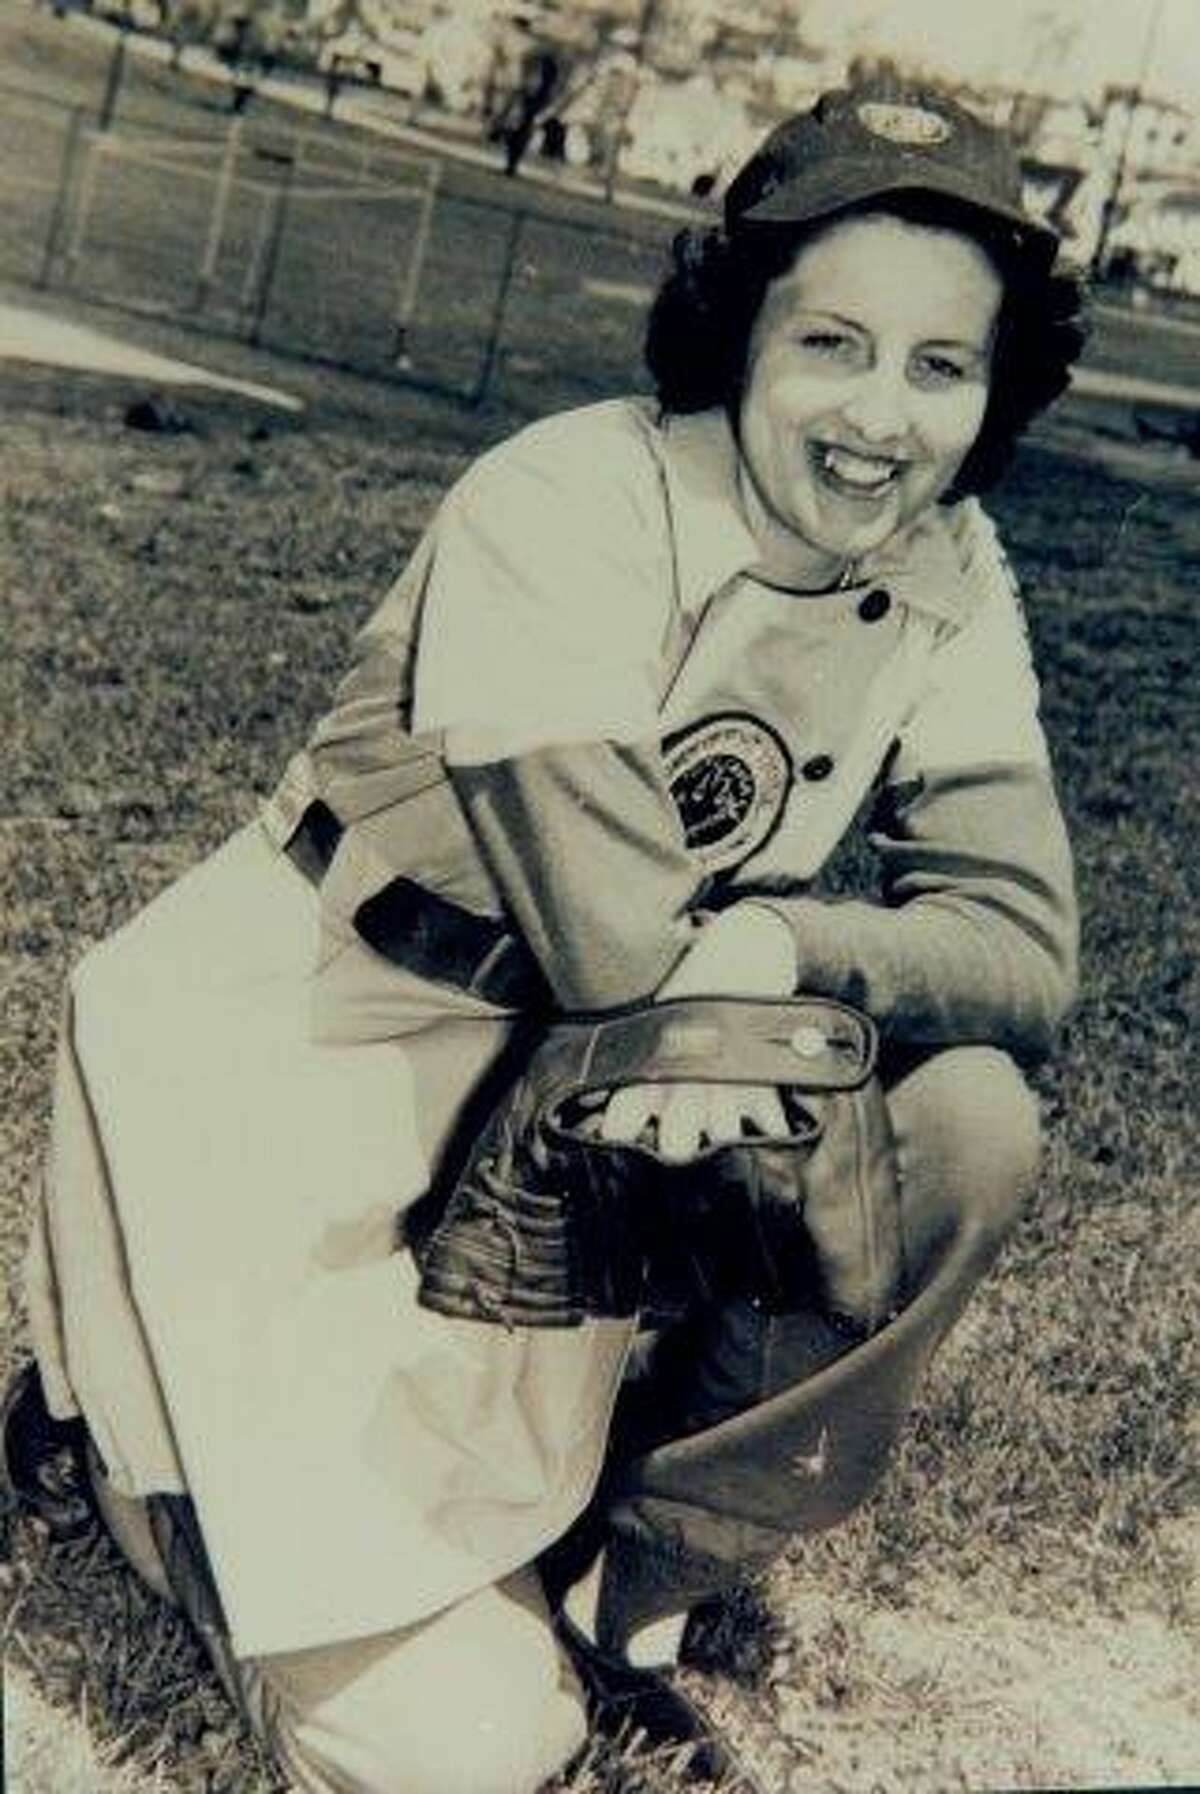 Dottie Collins of the AAG (Provided, Baseball Hall of Fame)